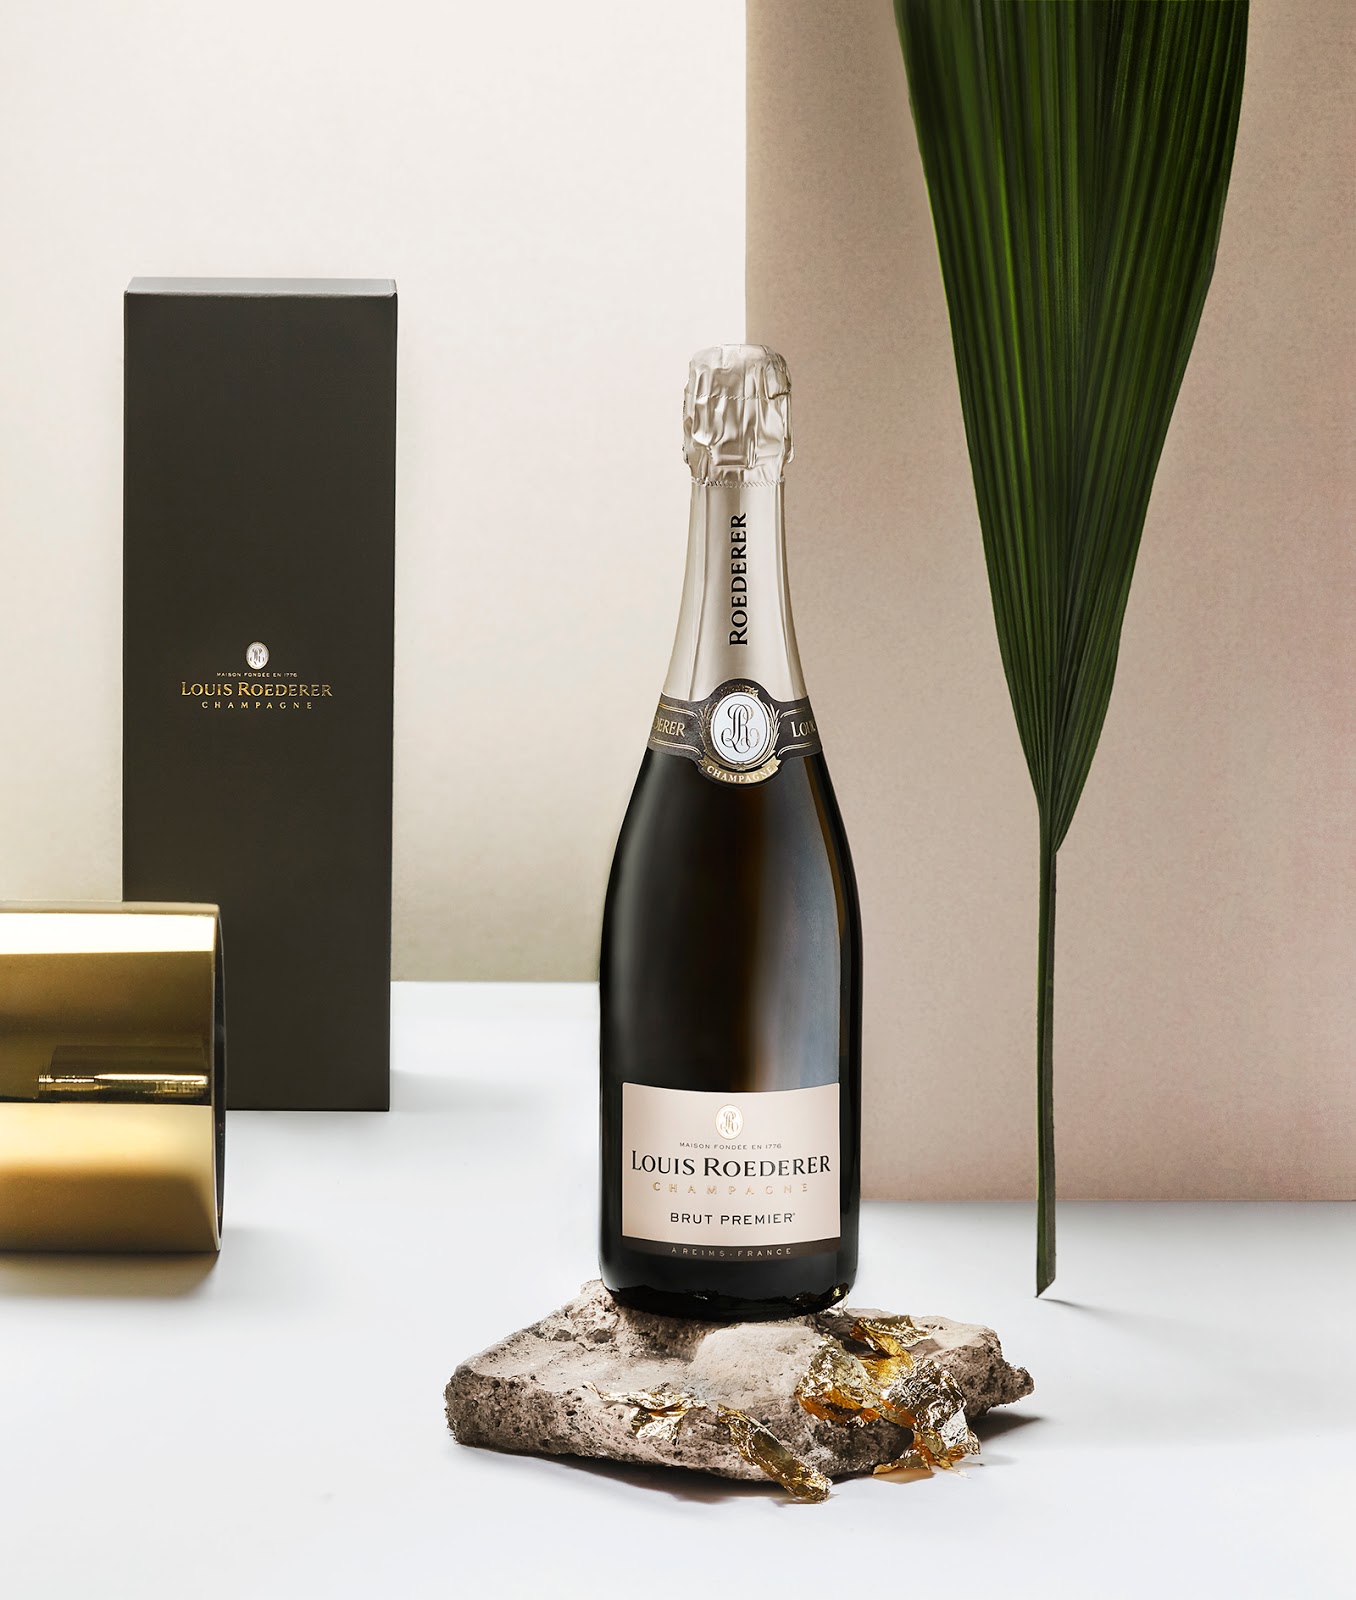 Louis collection. Луи Родерер. Шампанское Луи Родерер. Louis Roederer Cristal Brut Champagne. Луи Родерер Brut collection.